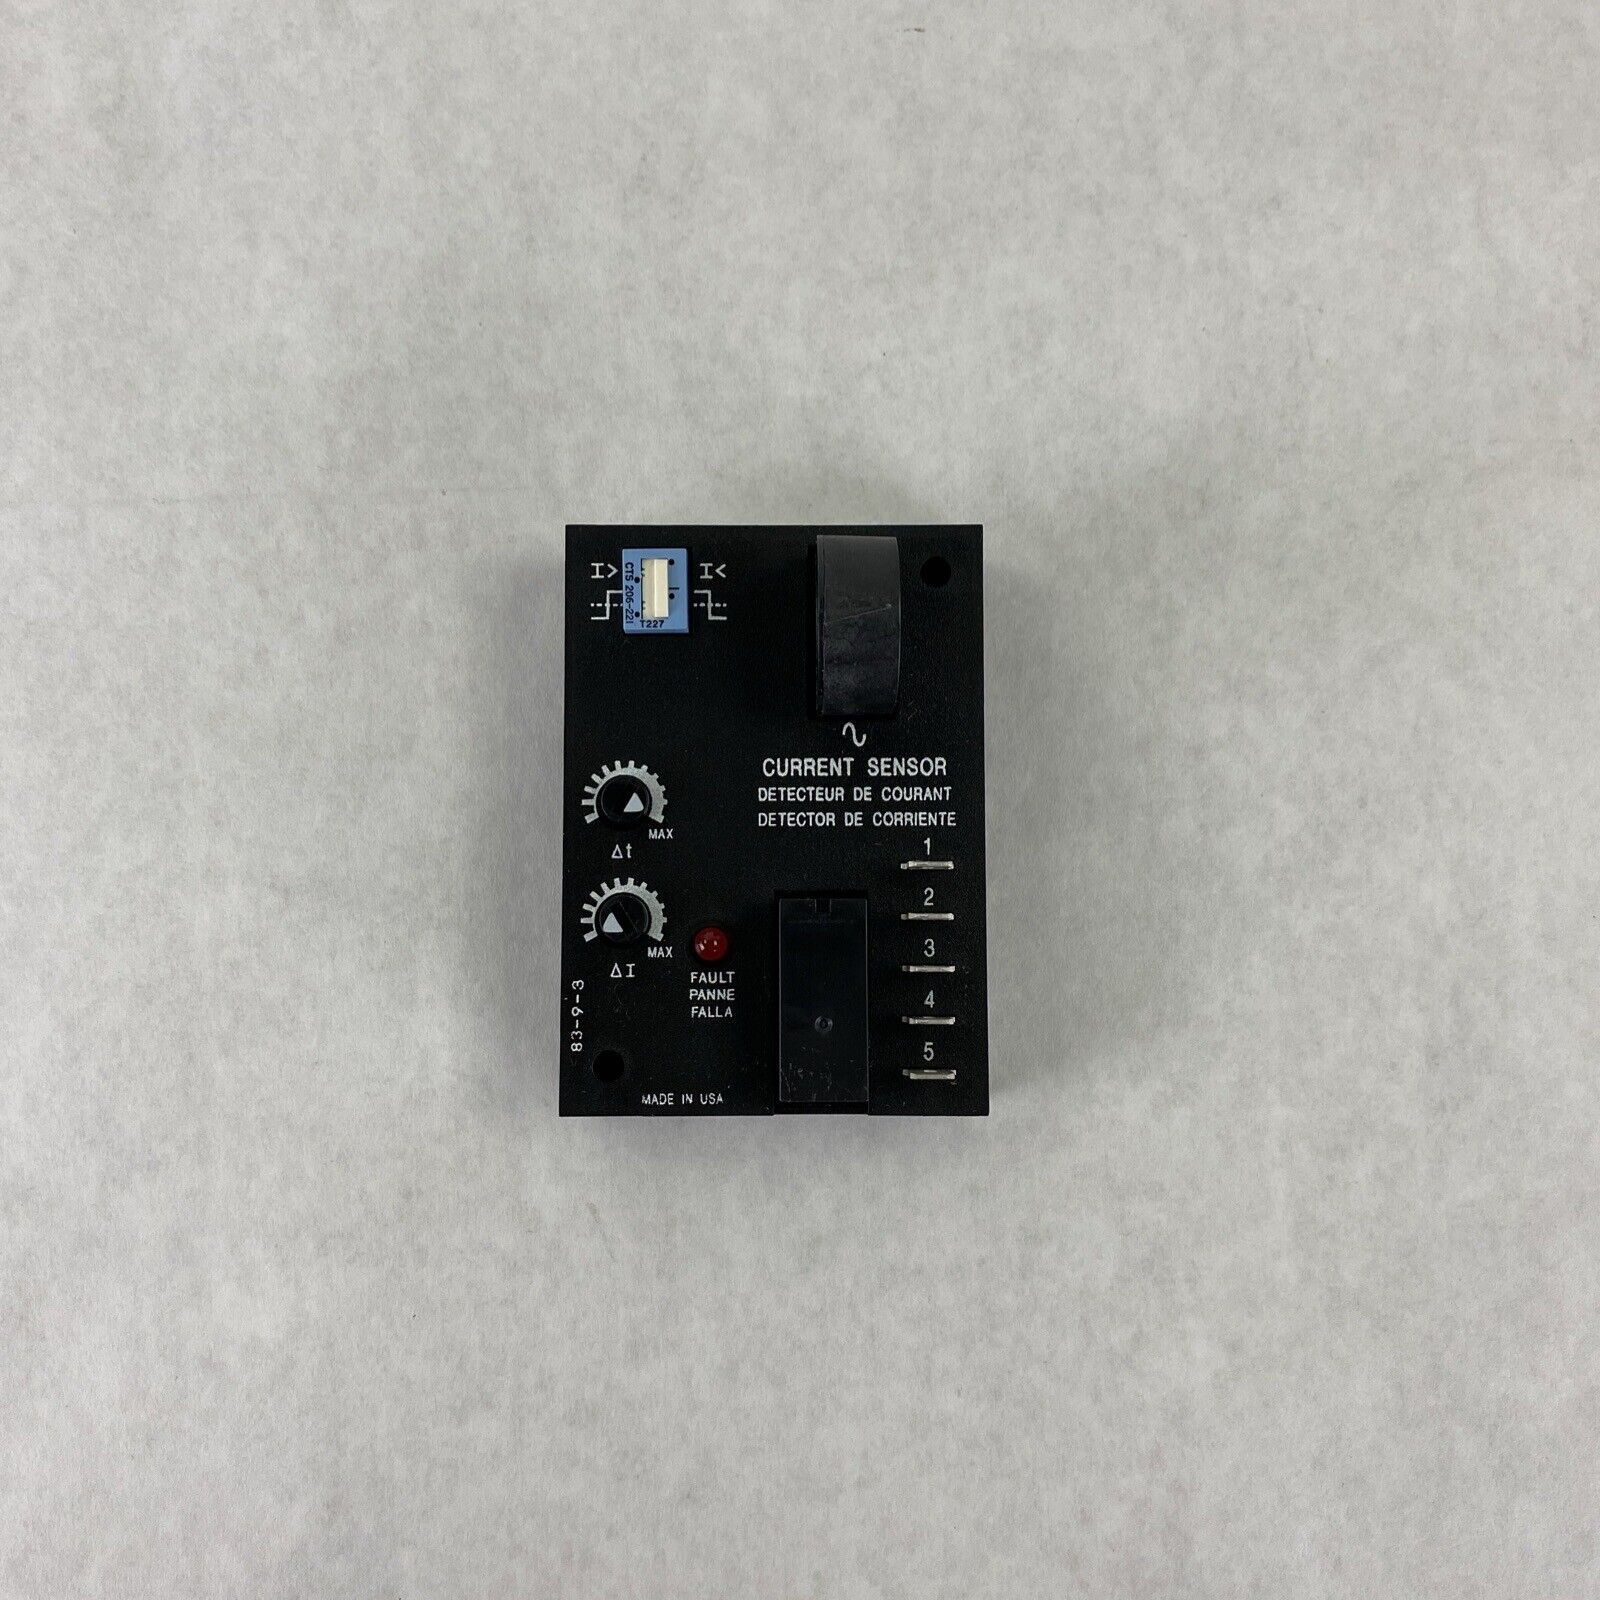 ABB ECS41BC Solid State Control ECS Series SSAC Protection Relay PC427